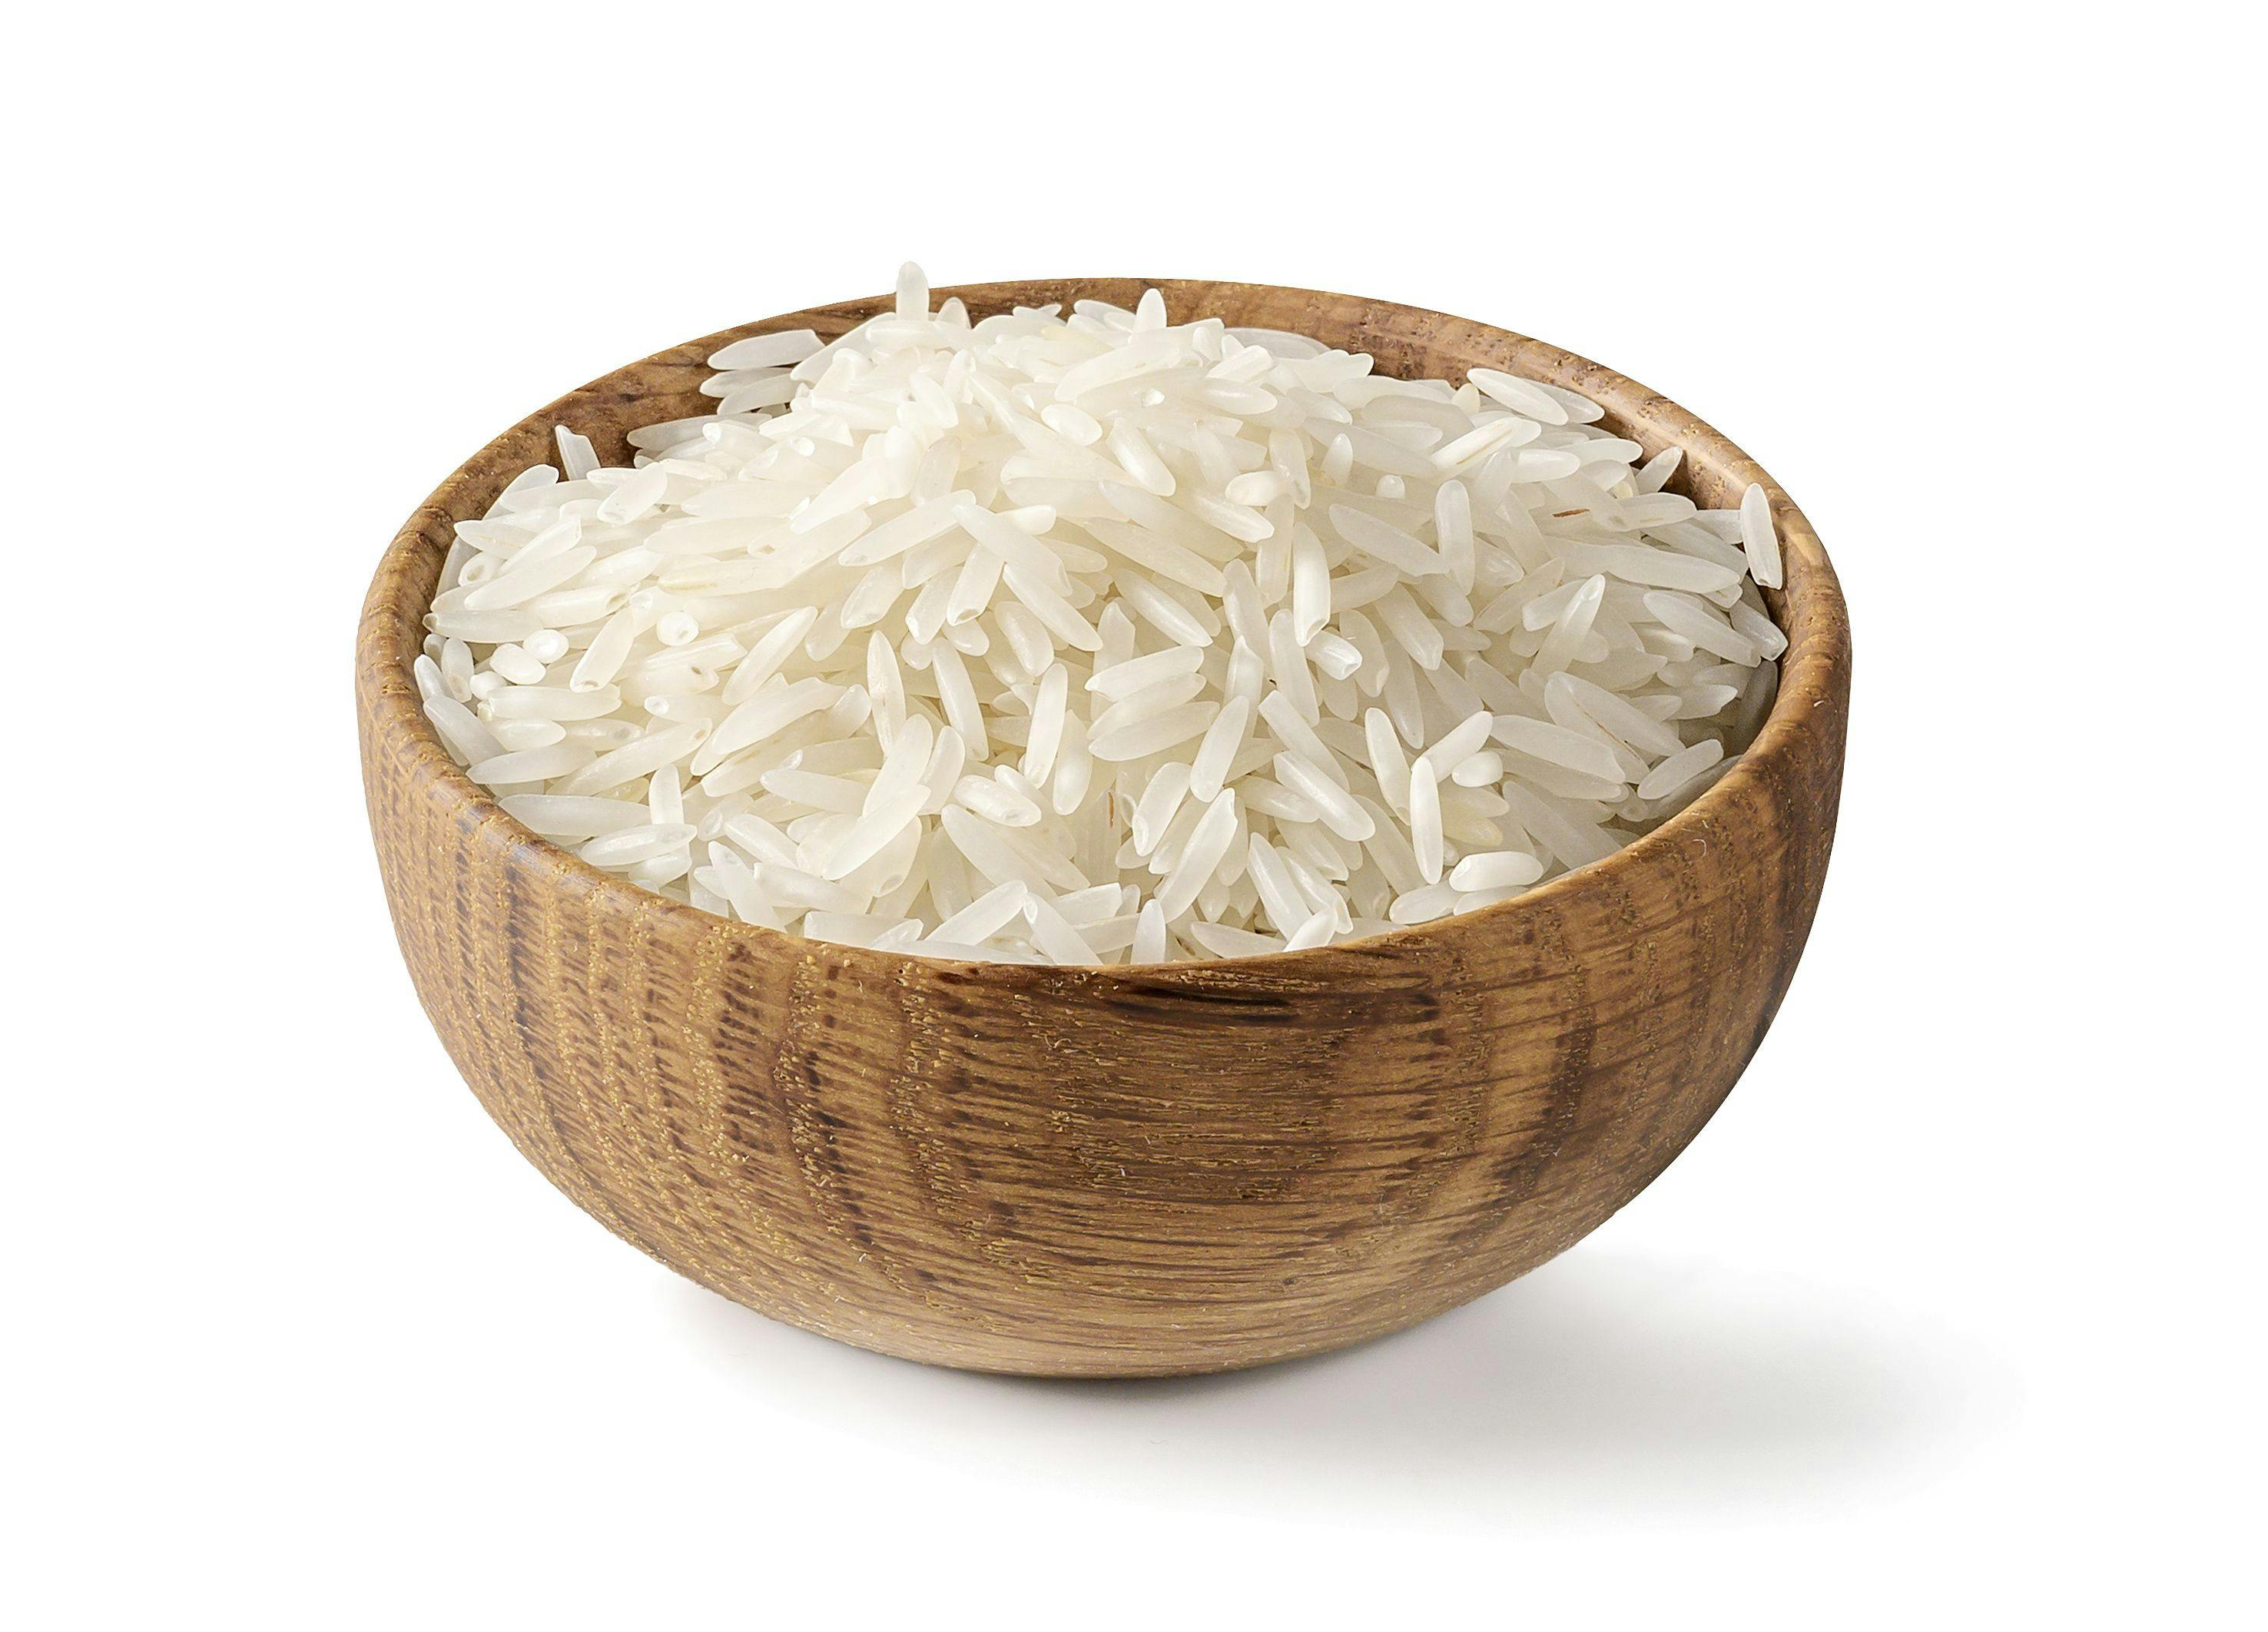 Dry white long rice basmati in wooden bowl isolated on a white background. | Image Credit: © Soho A studio - stock.adobe.com